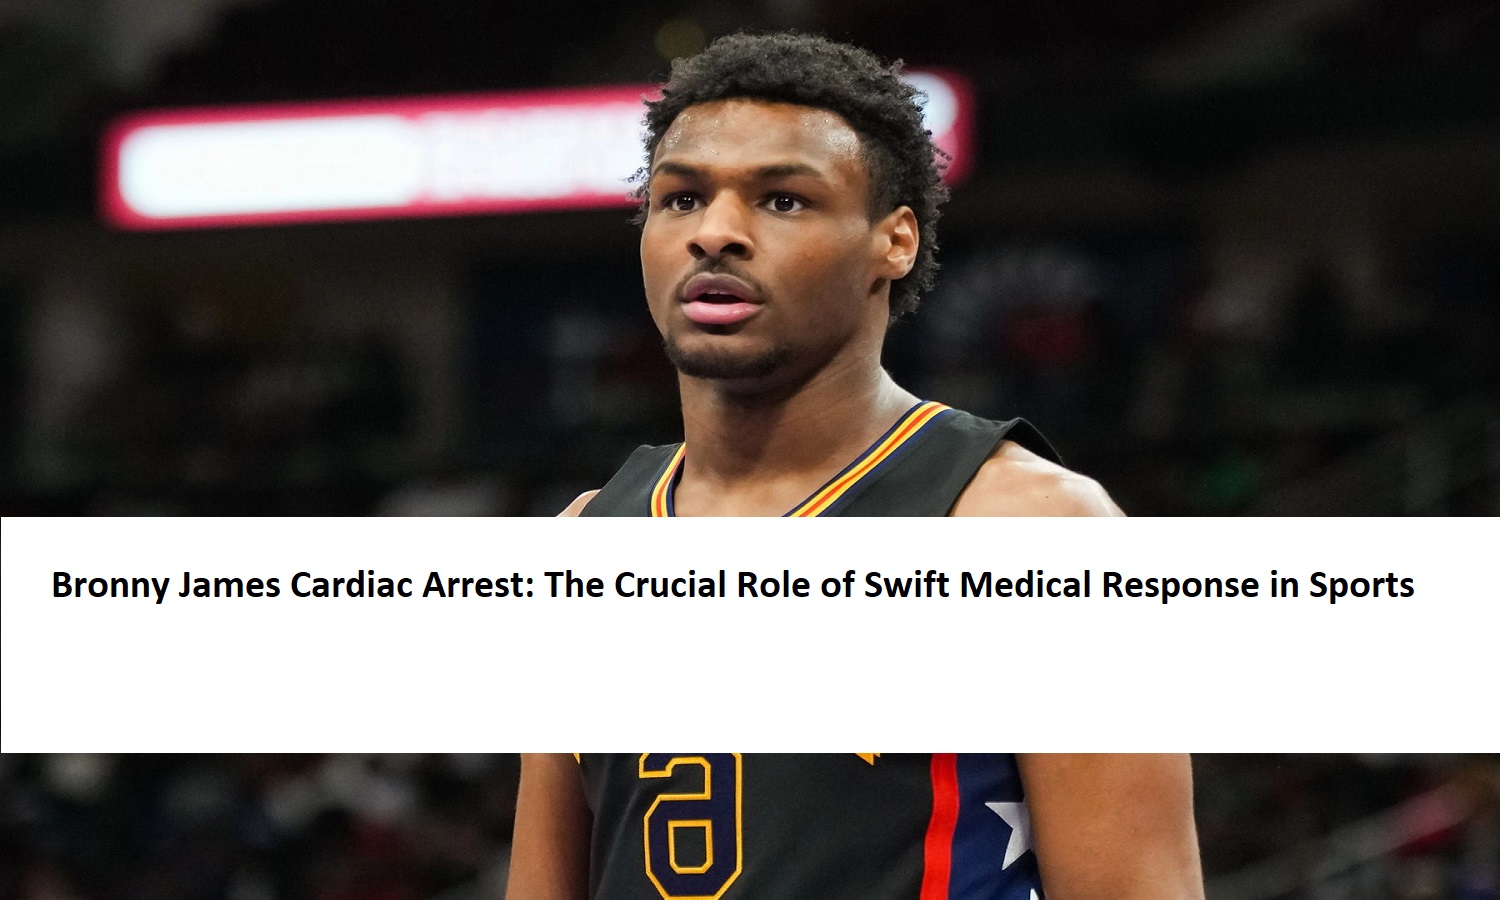 Bronny James Cardiac Arrest: The Crucial Role of Swift Medical Response in Sports